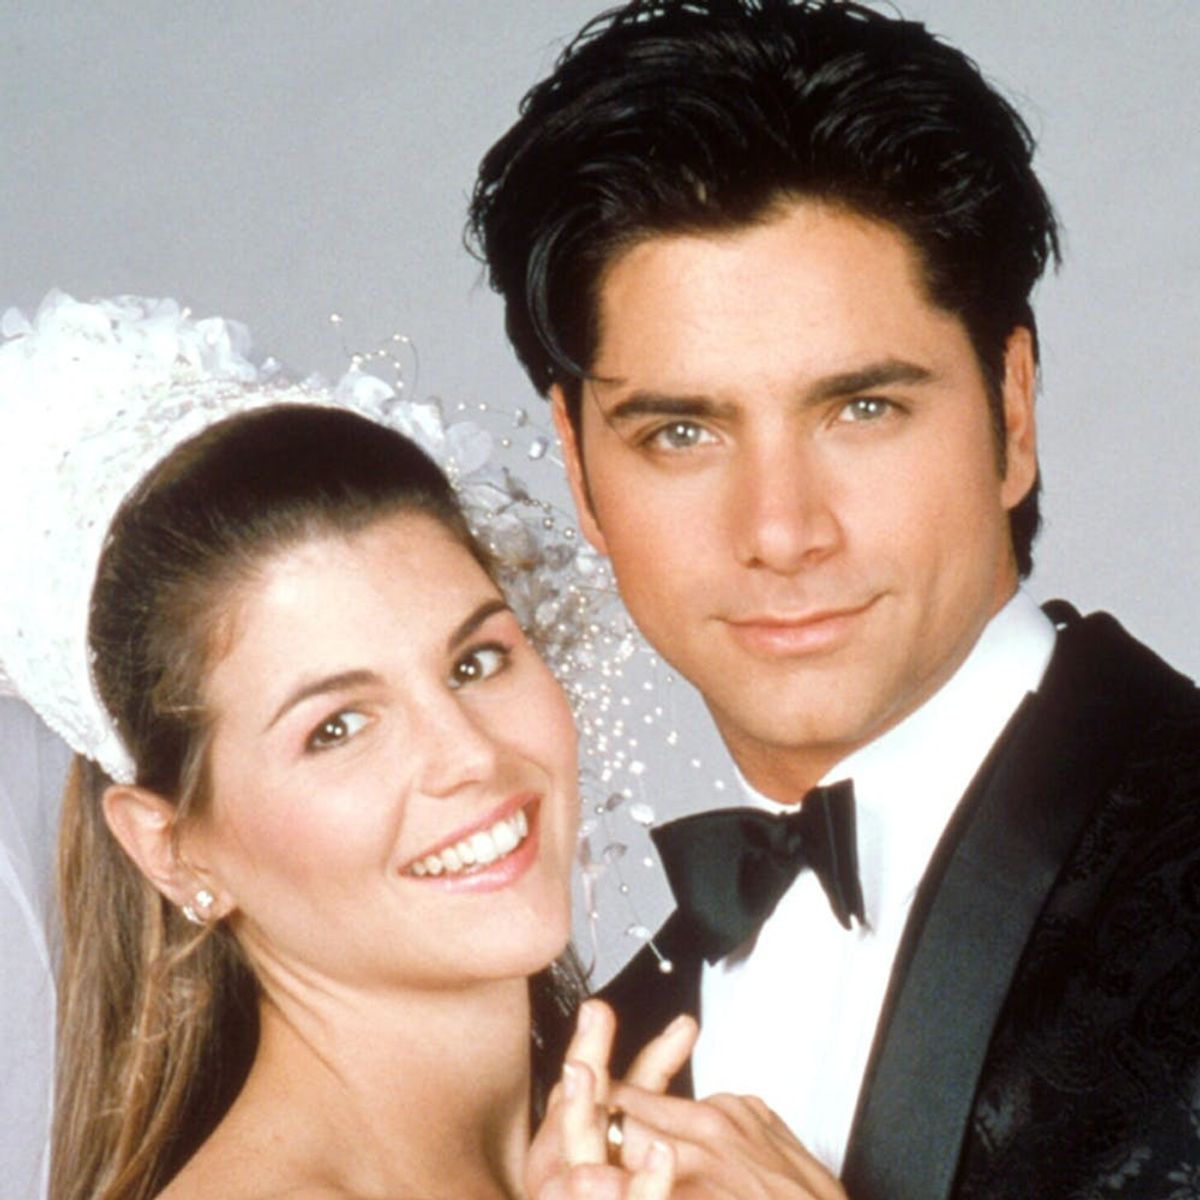 This Photo Will Make You Super Excited for the Return of Full House